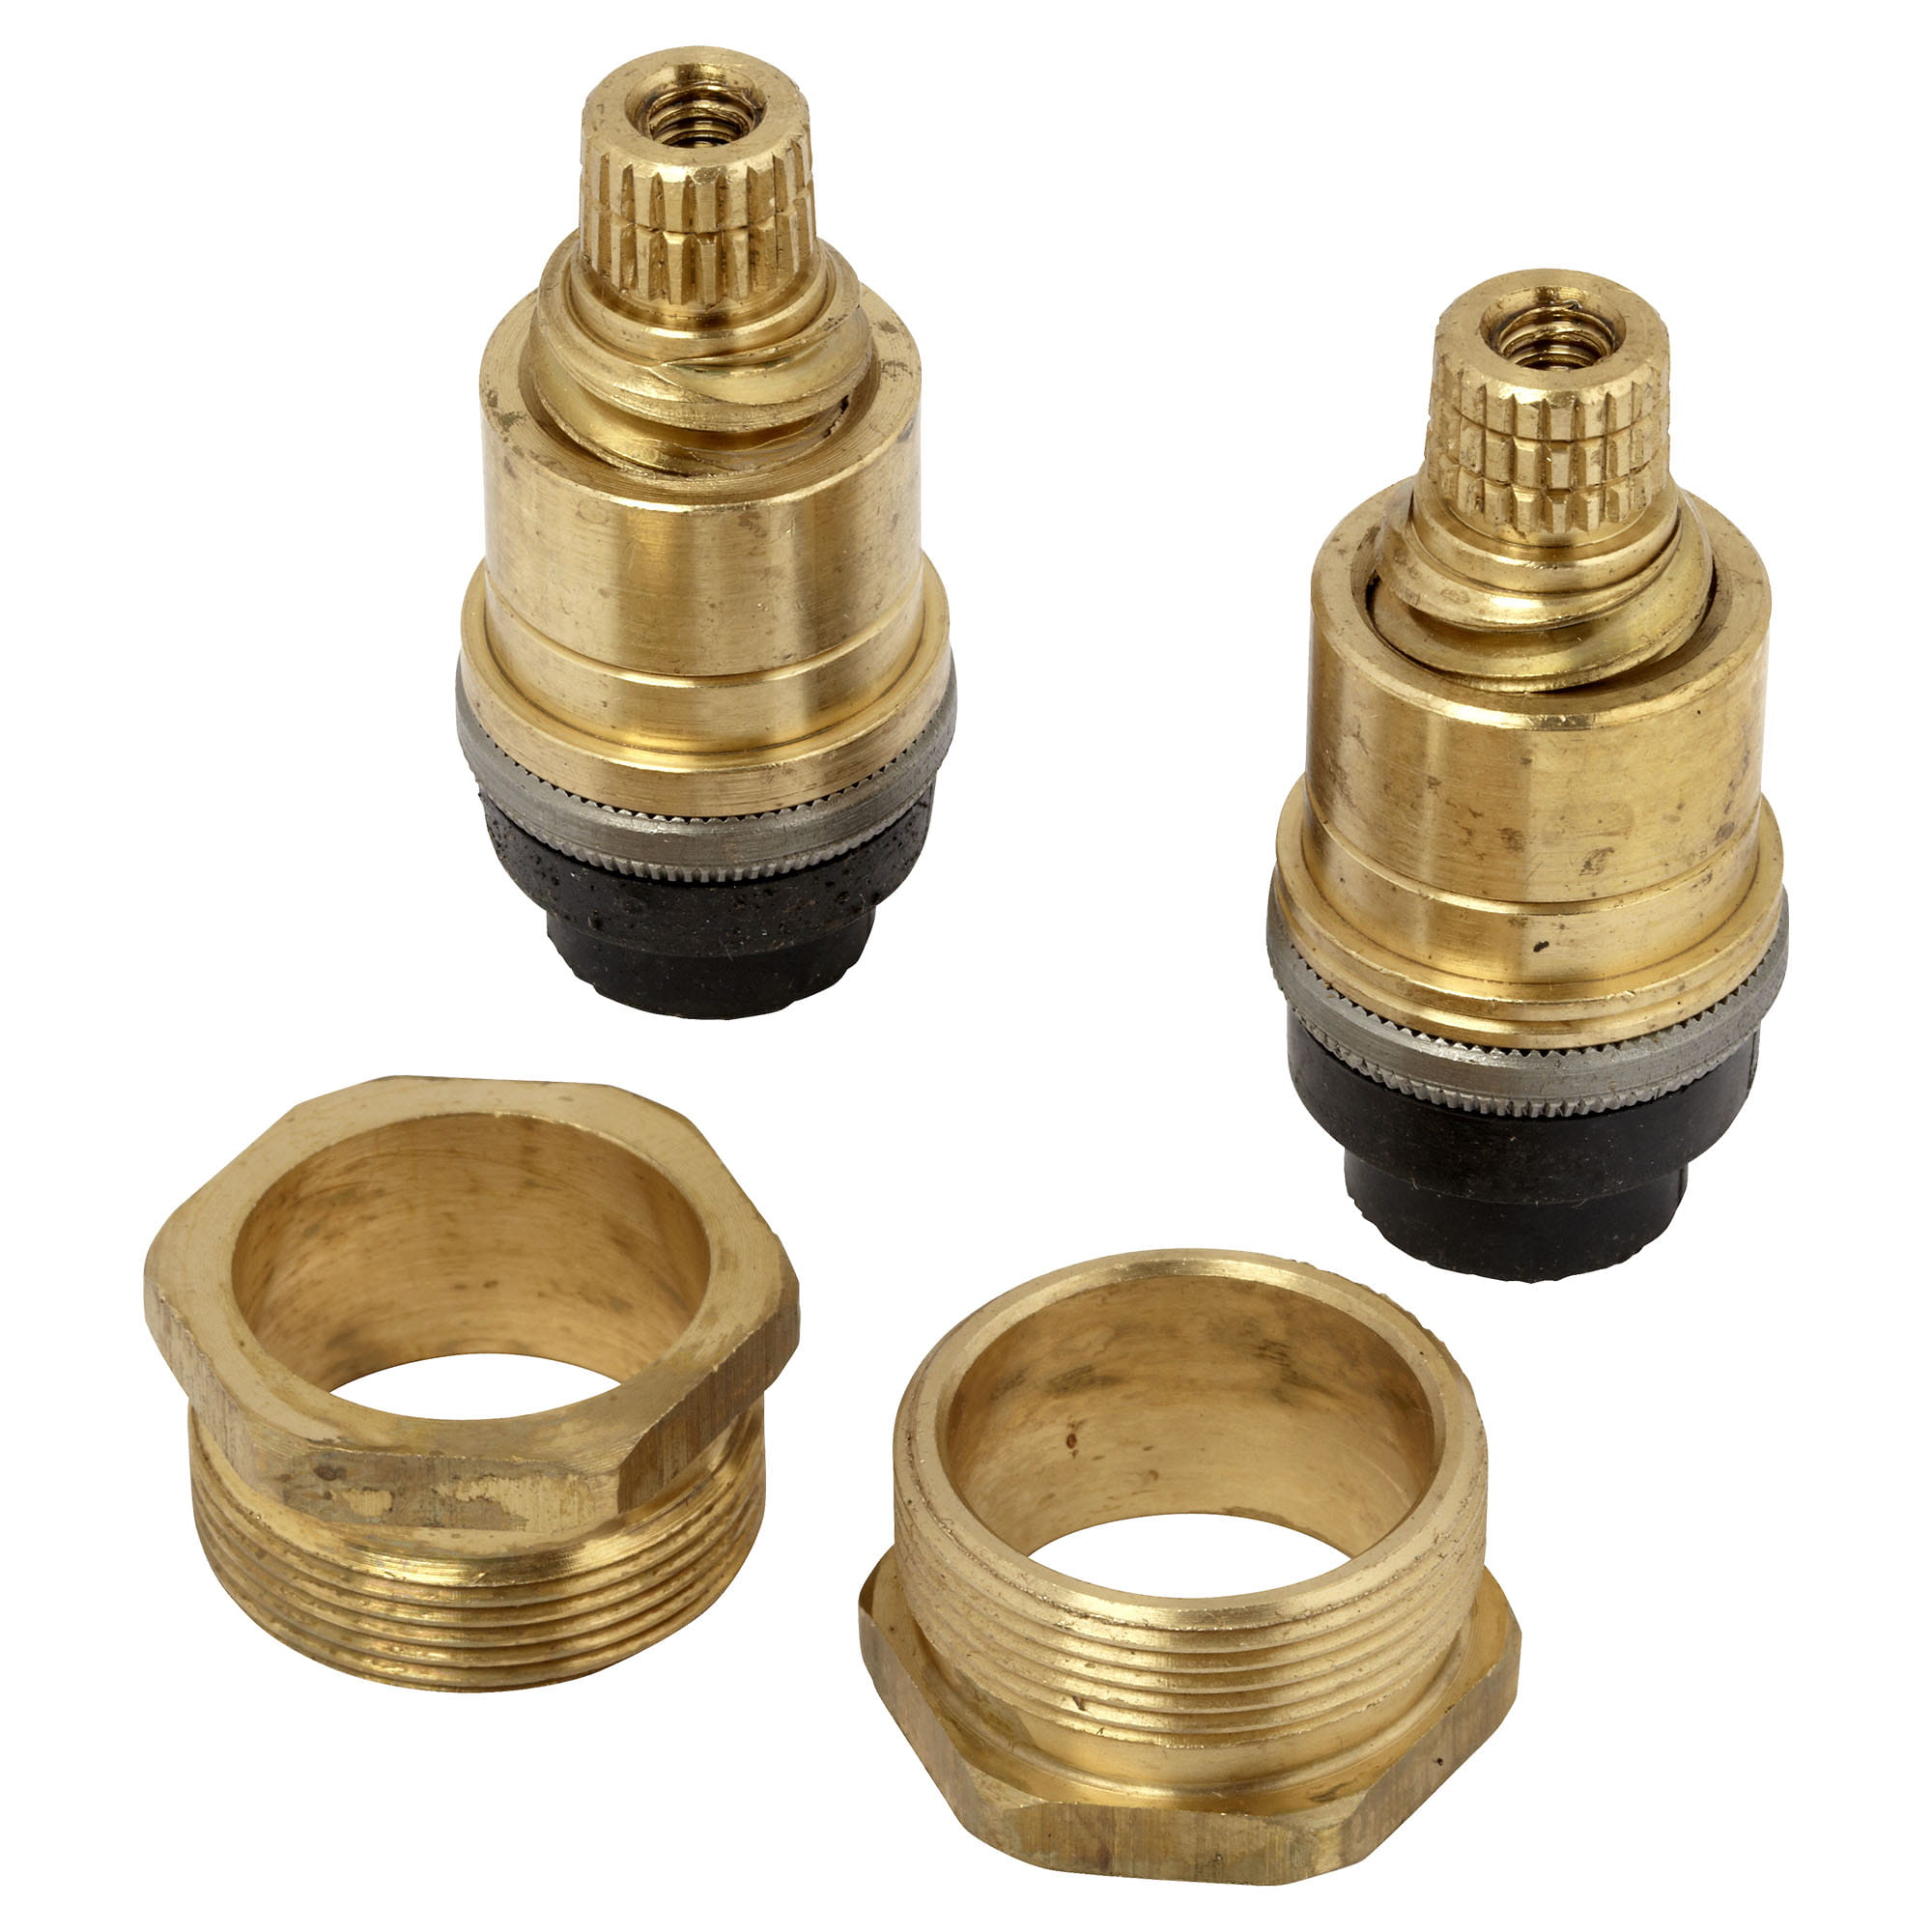 Aquaseal Left-Hand and Right-Hand Valve Rebuild Kit